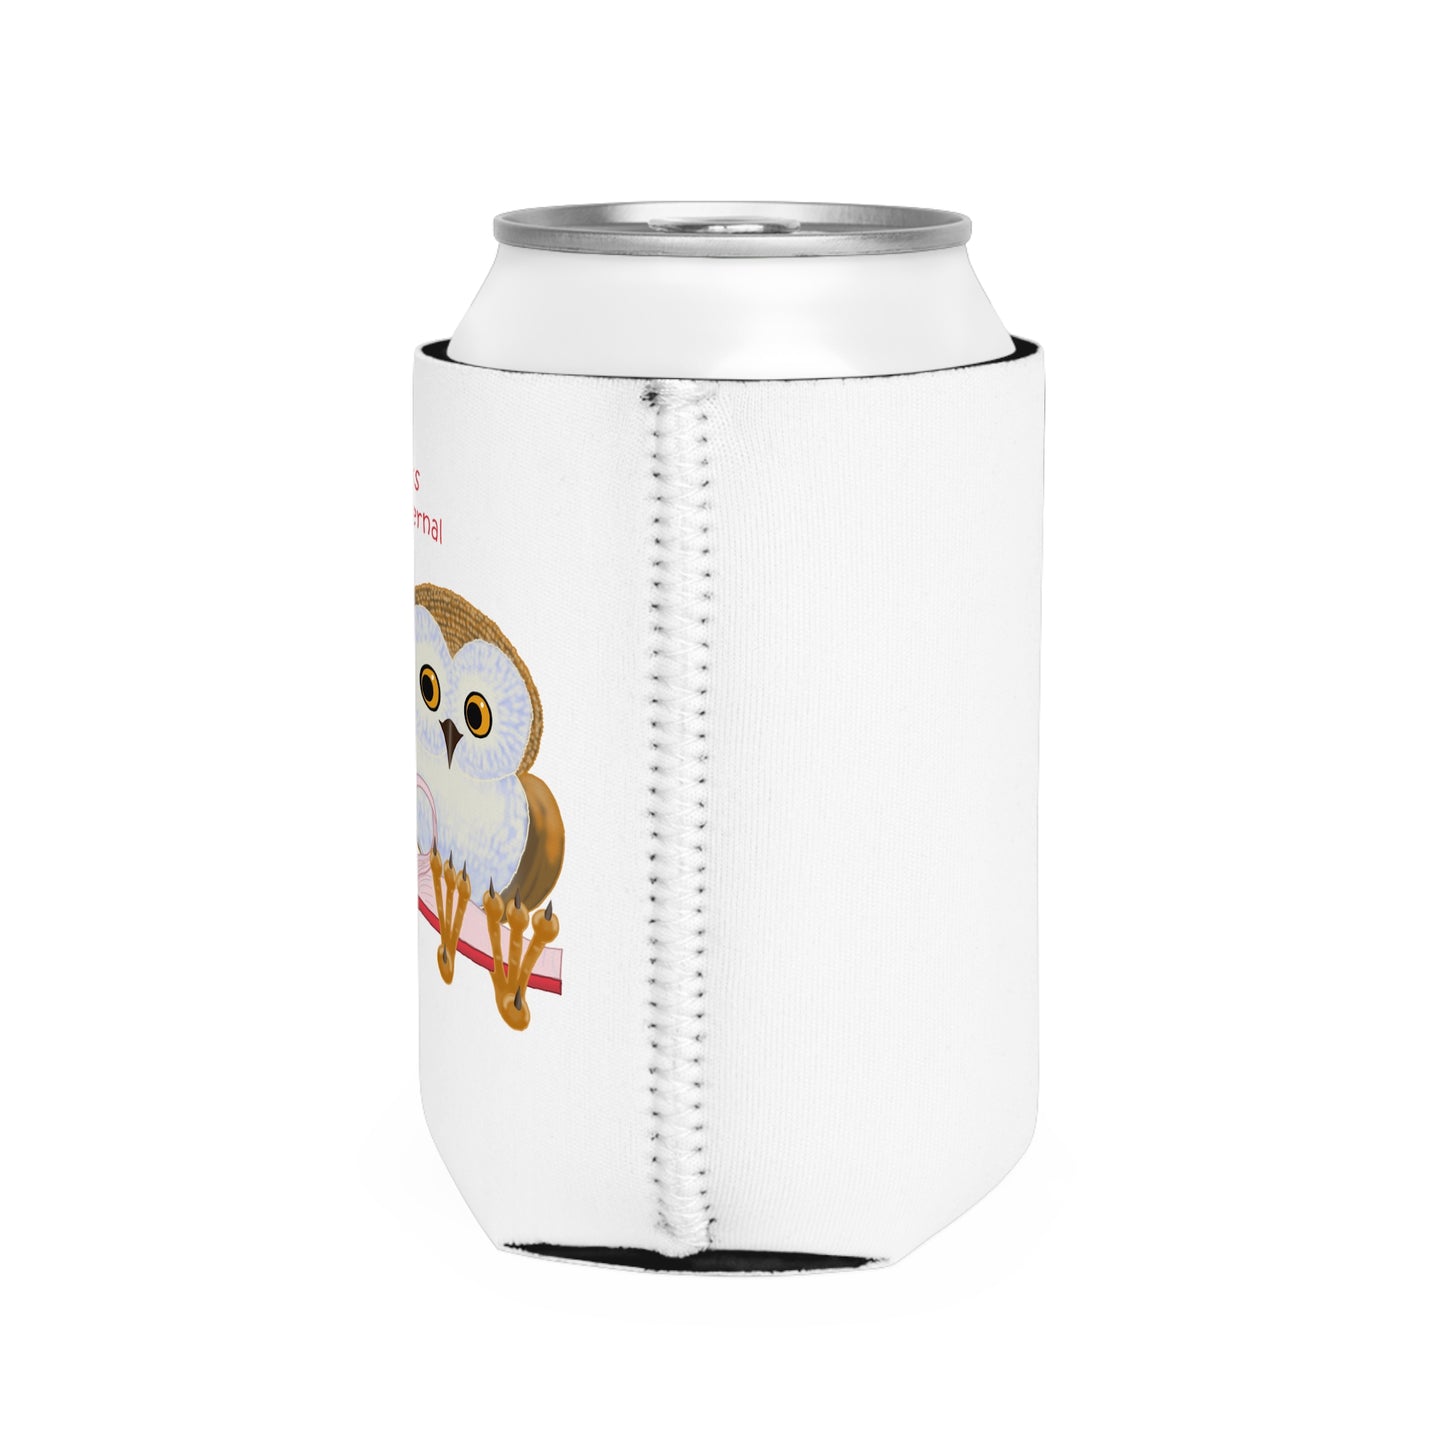 In Books Love Is Eternal Can Cooler Sleeve